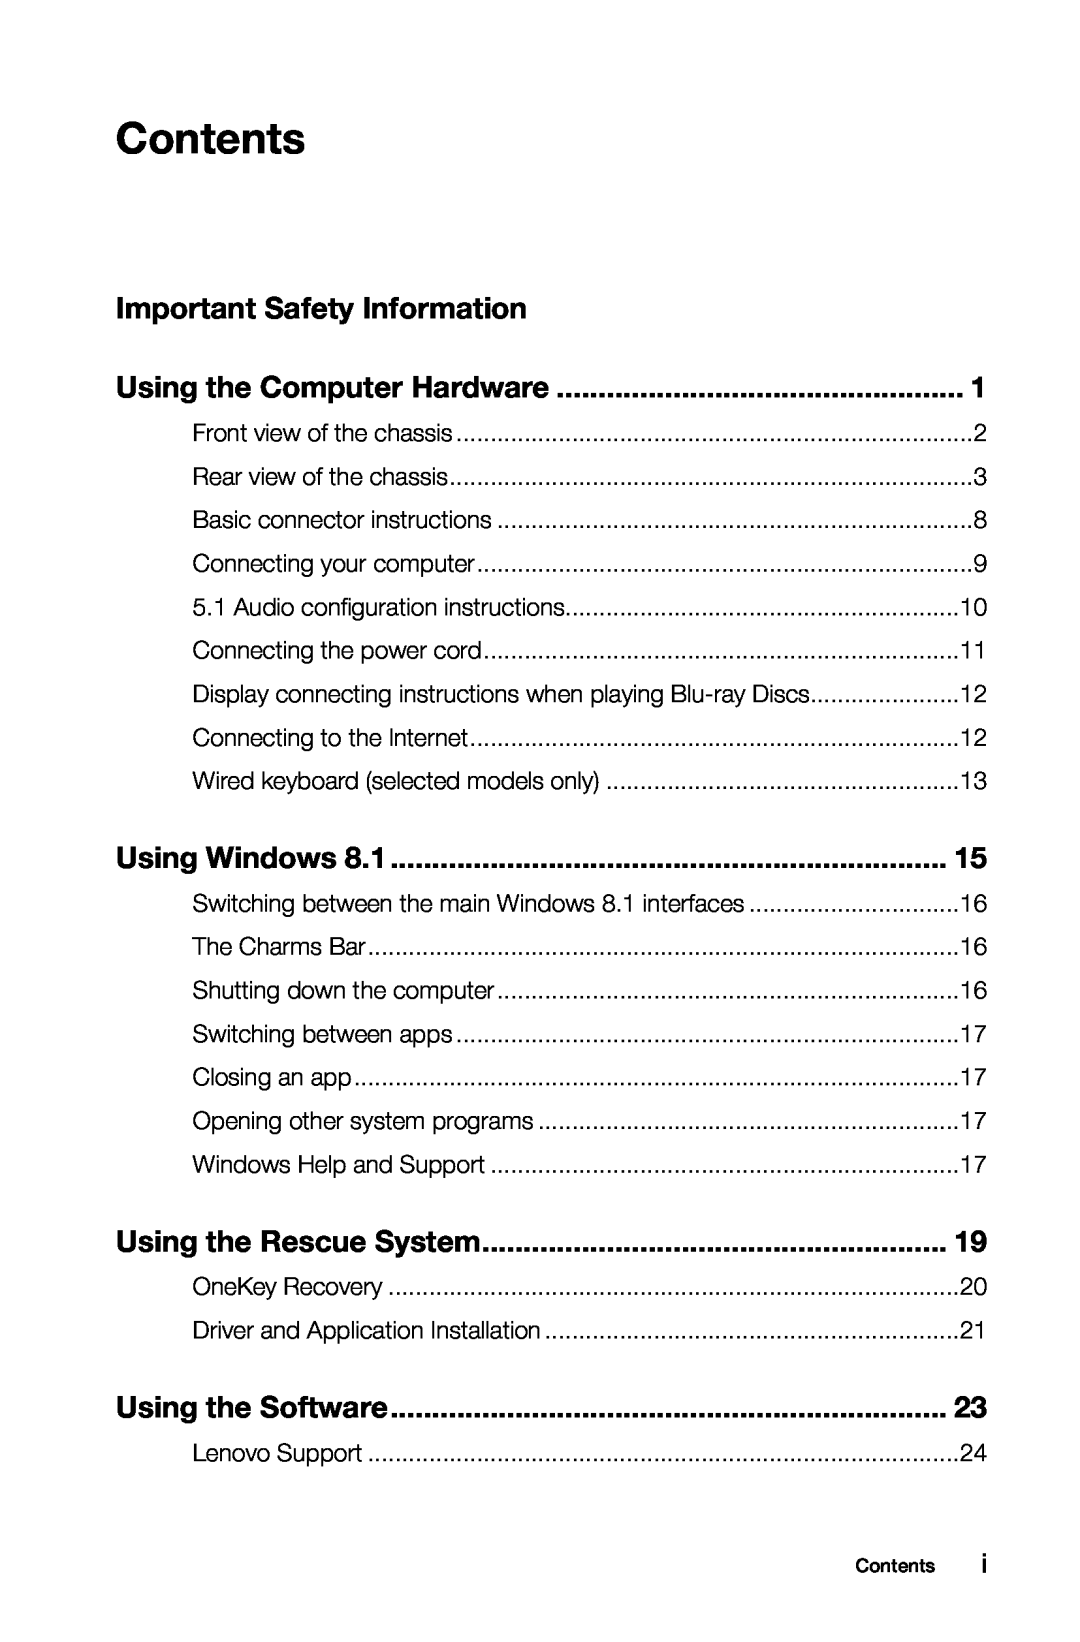 Lenovo 57321302 manual Contents, Important Safety Information, Using Windows, Using the Rescue System, Using the Software 